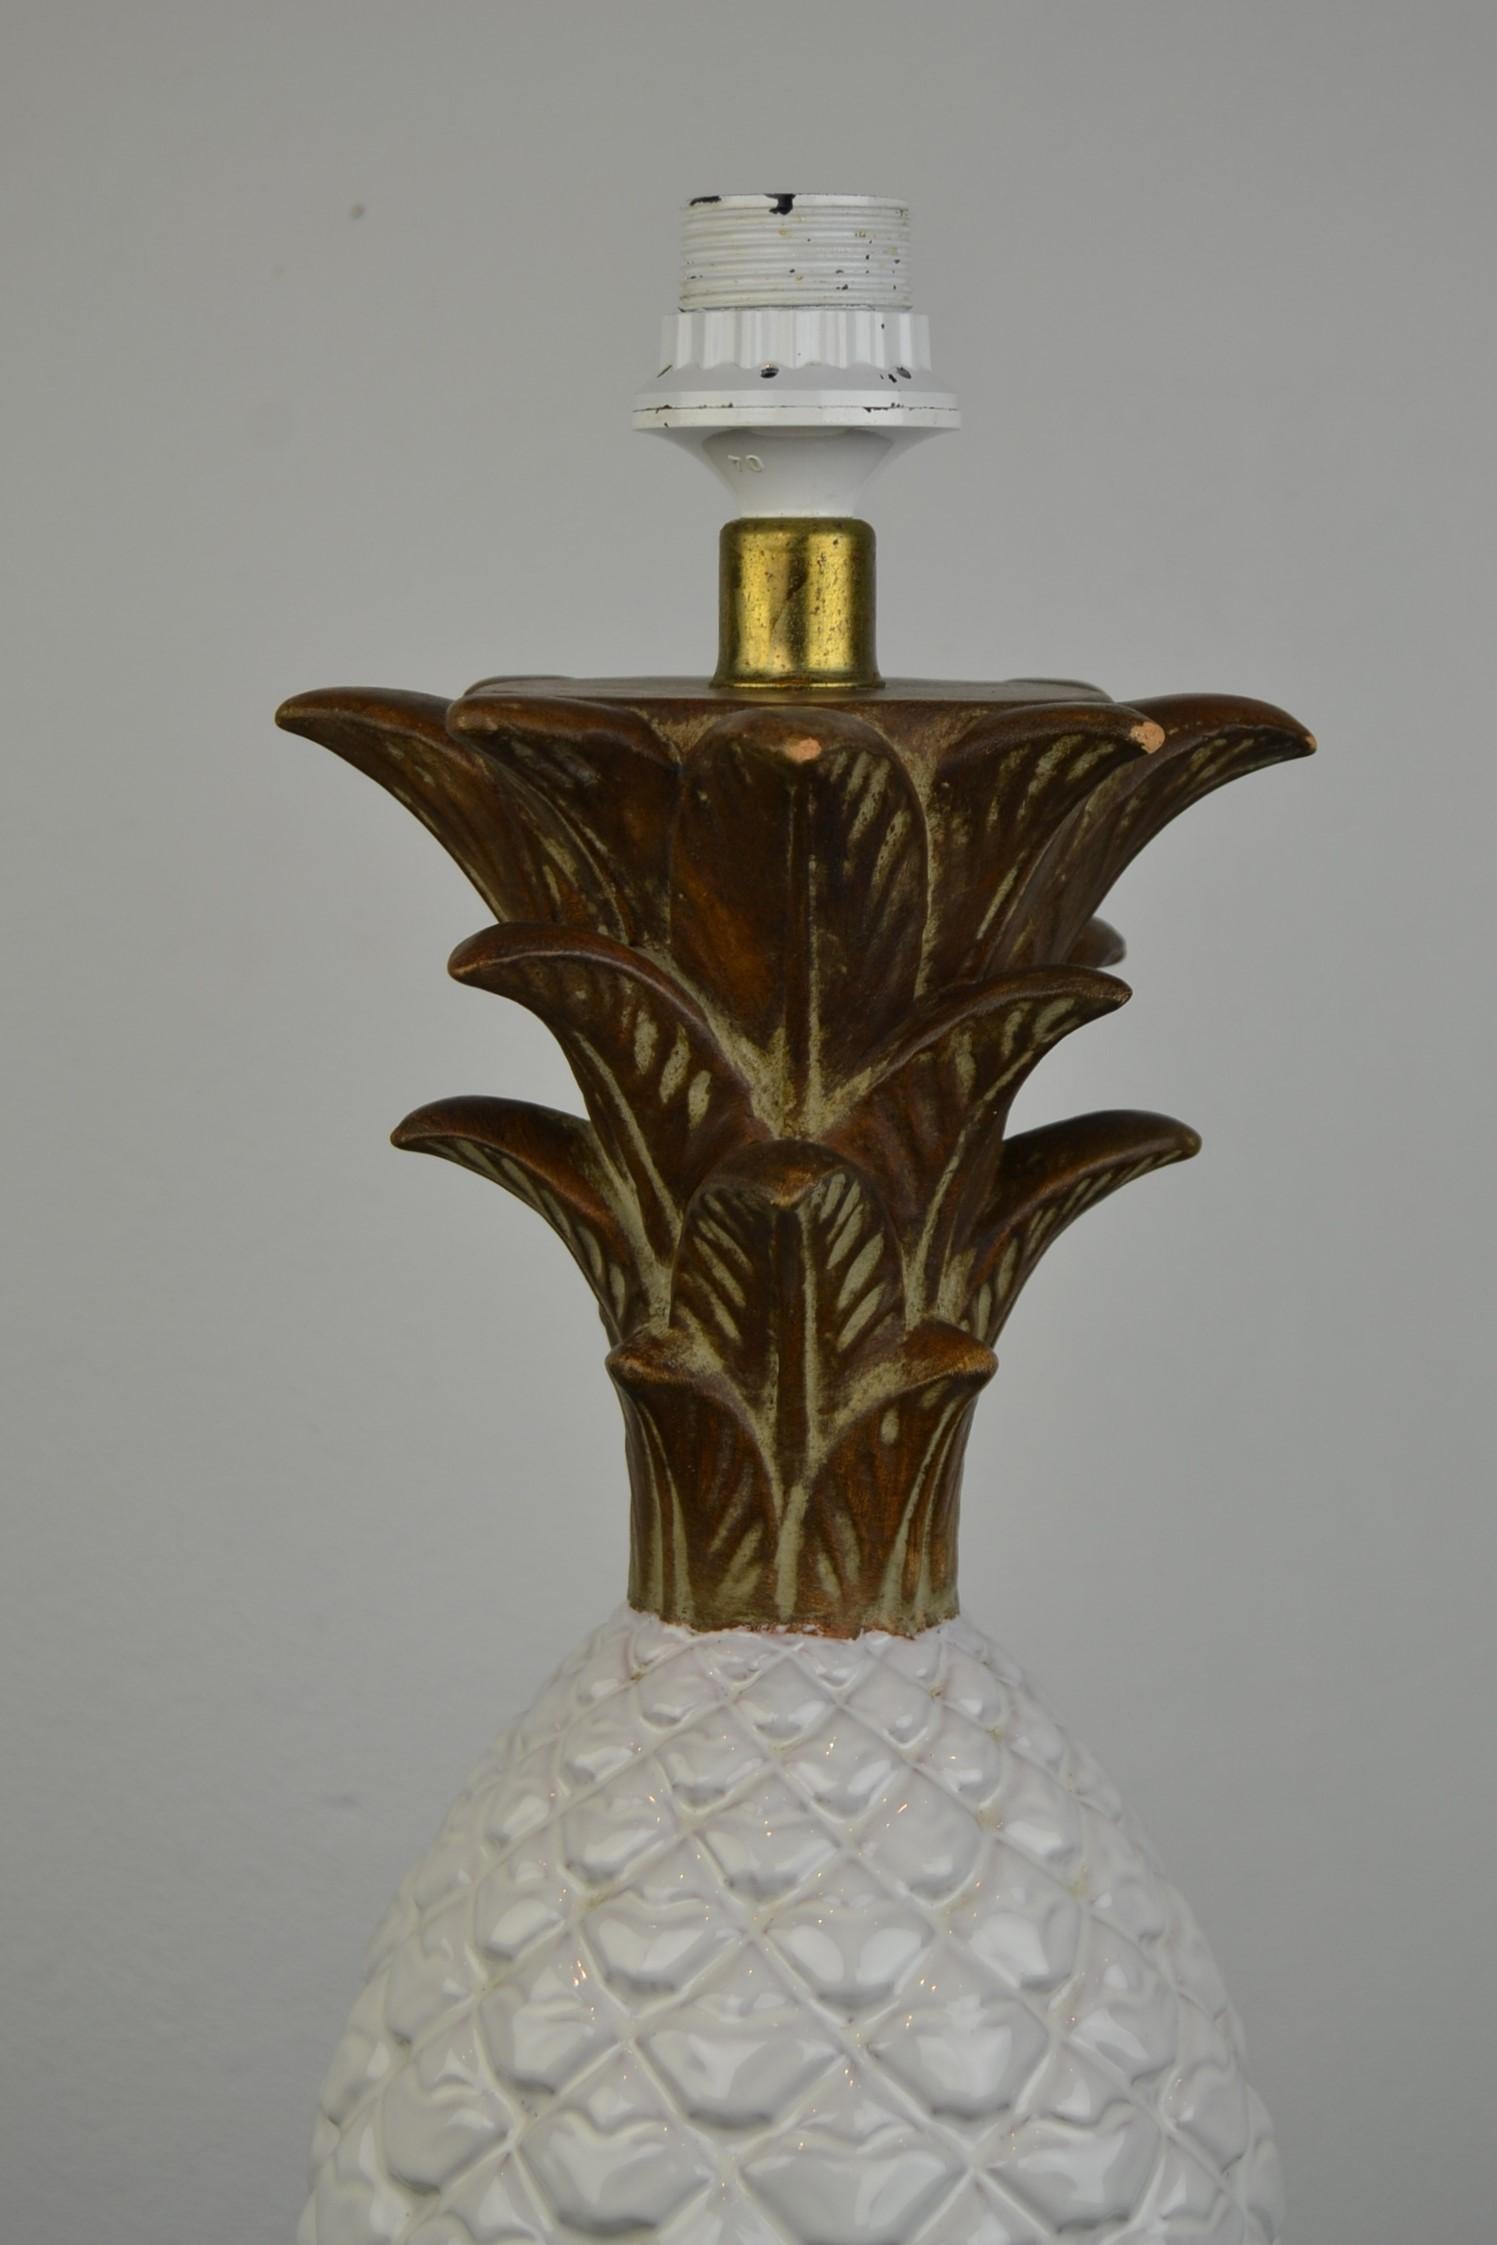 Zaccagnini Ceramic Pineapple Table Lamp, Italy, 1960s For Sale 11